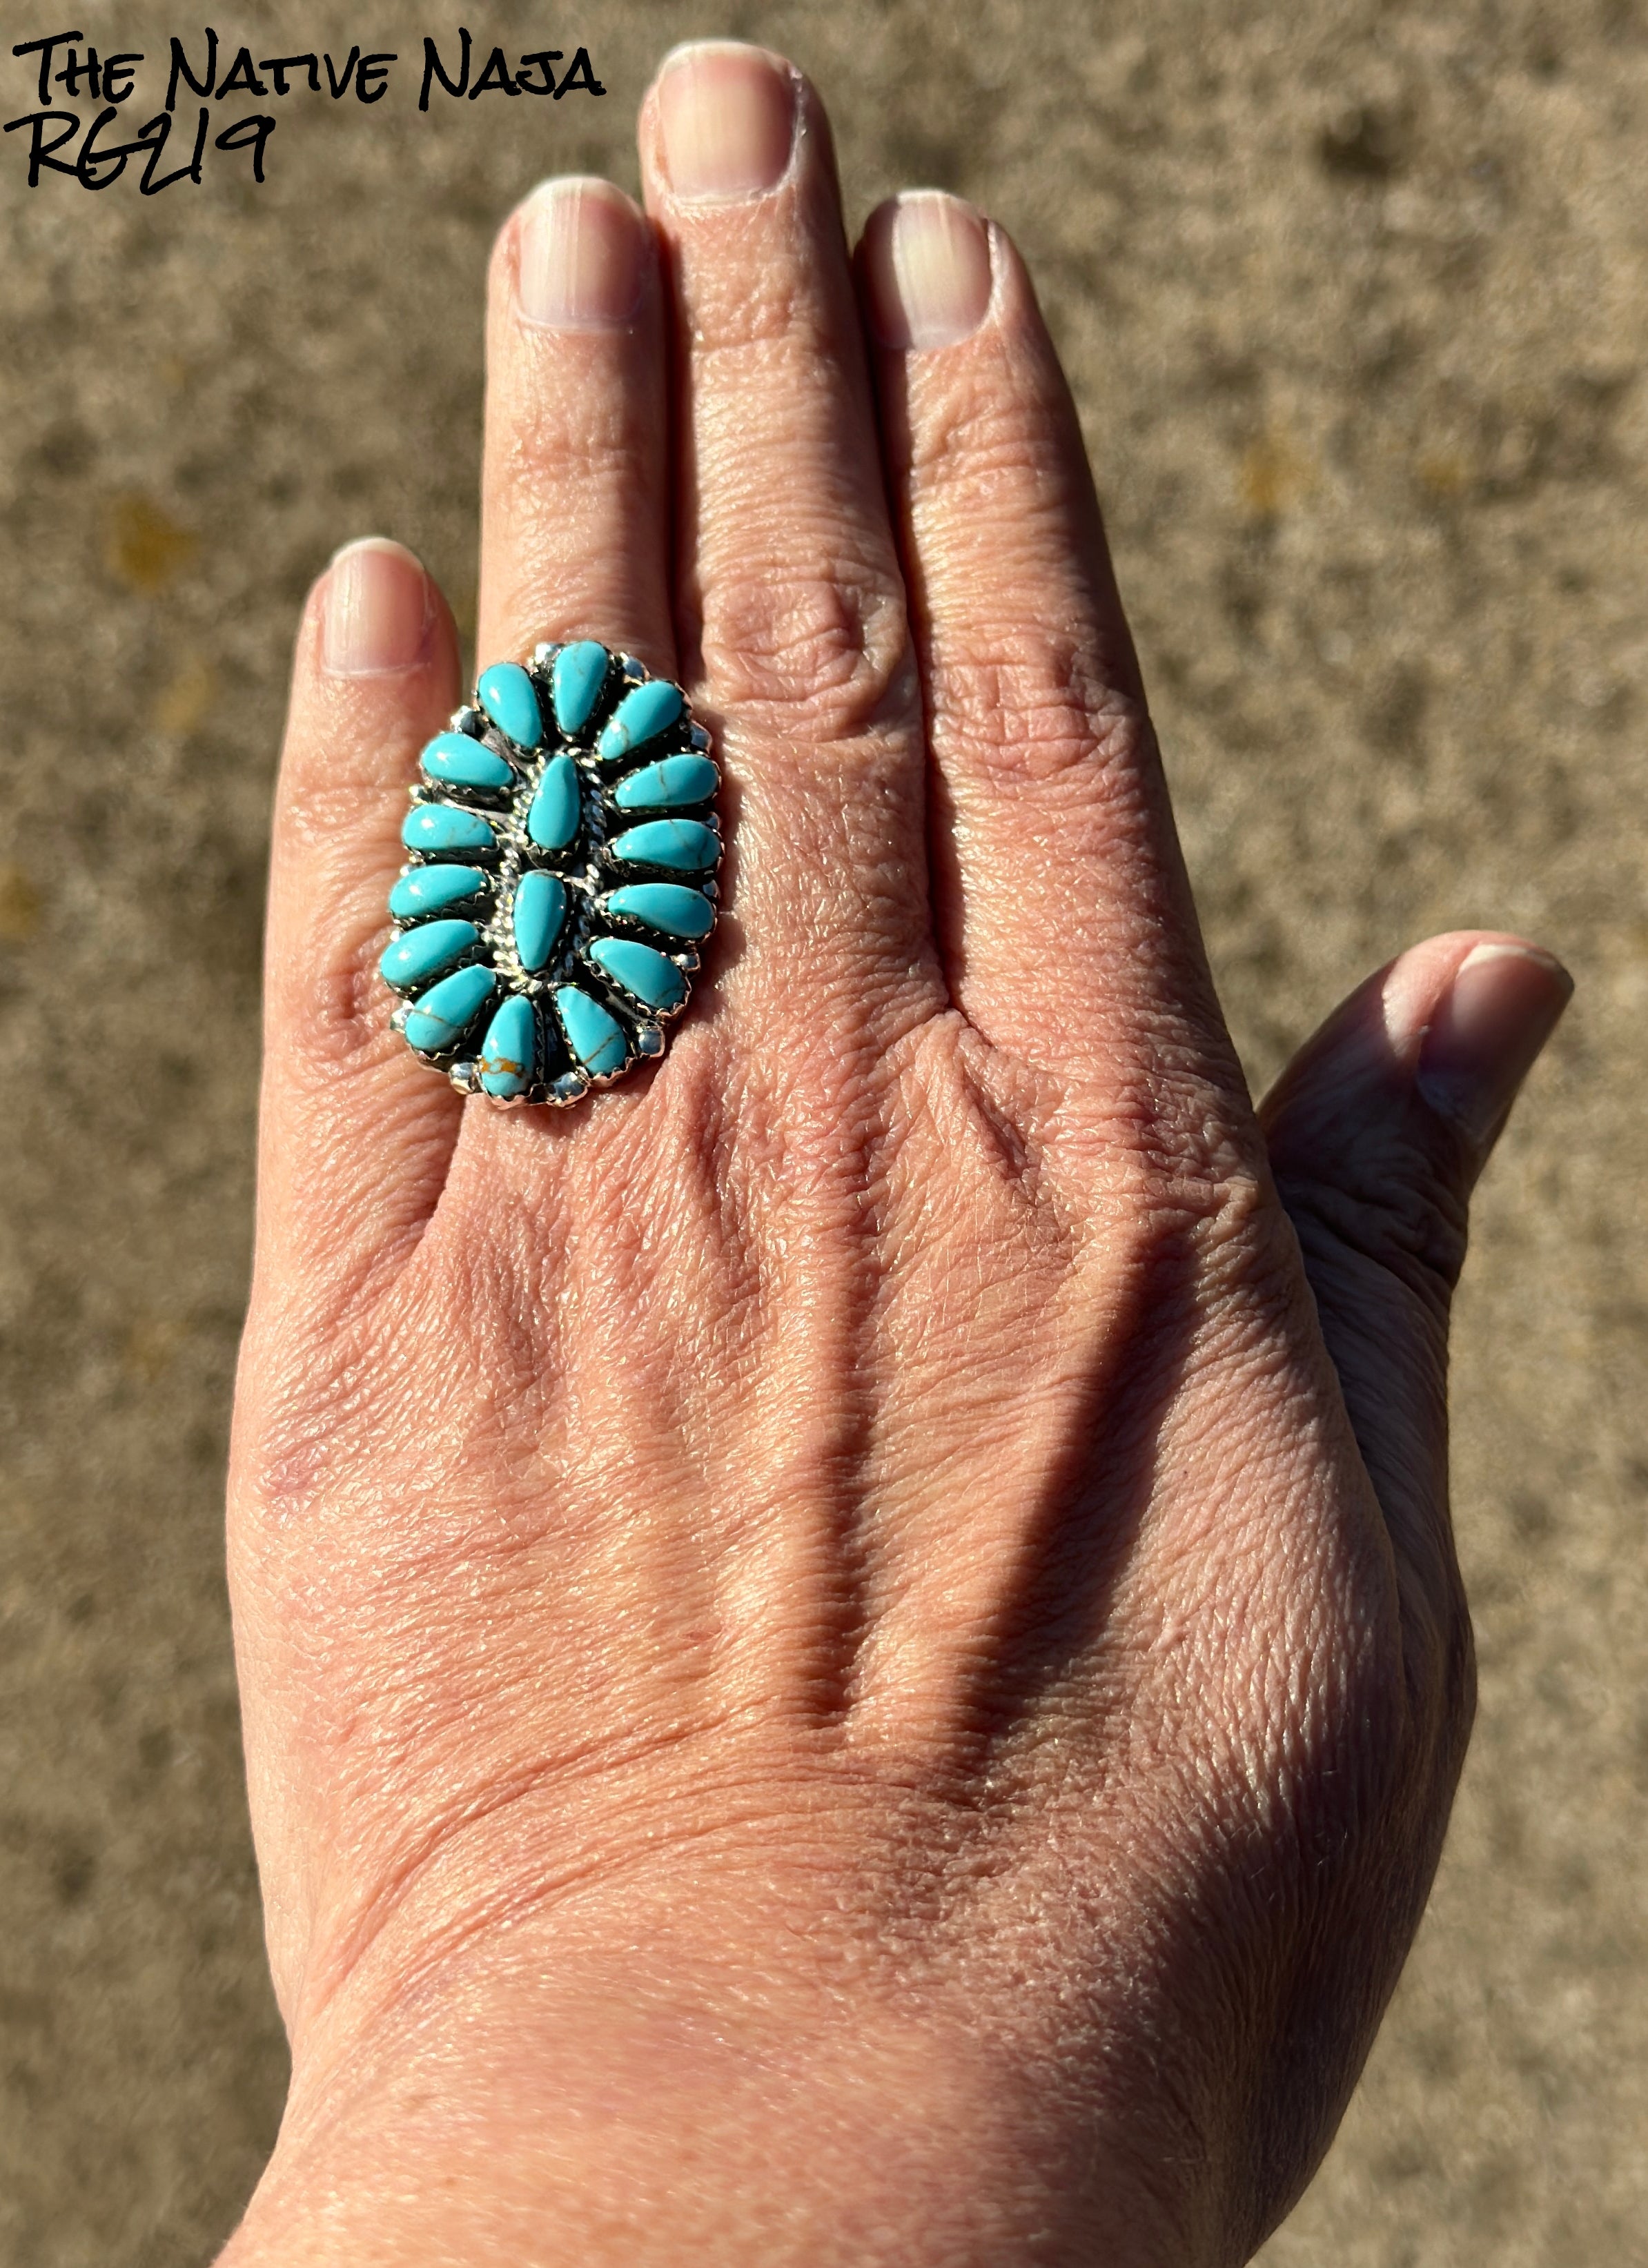 Large Navajo Jesse Williams Oval Petit Point Turquoise & Sterling Silver Ring Size 9 3/4 RG219